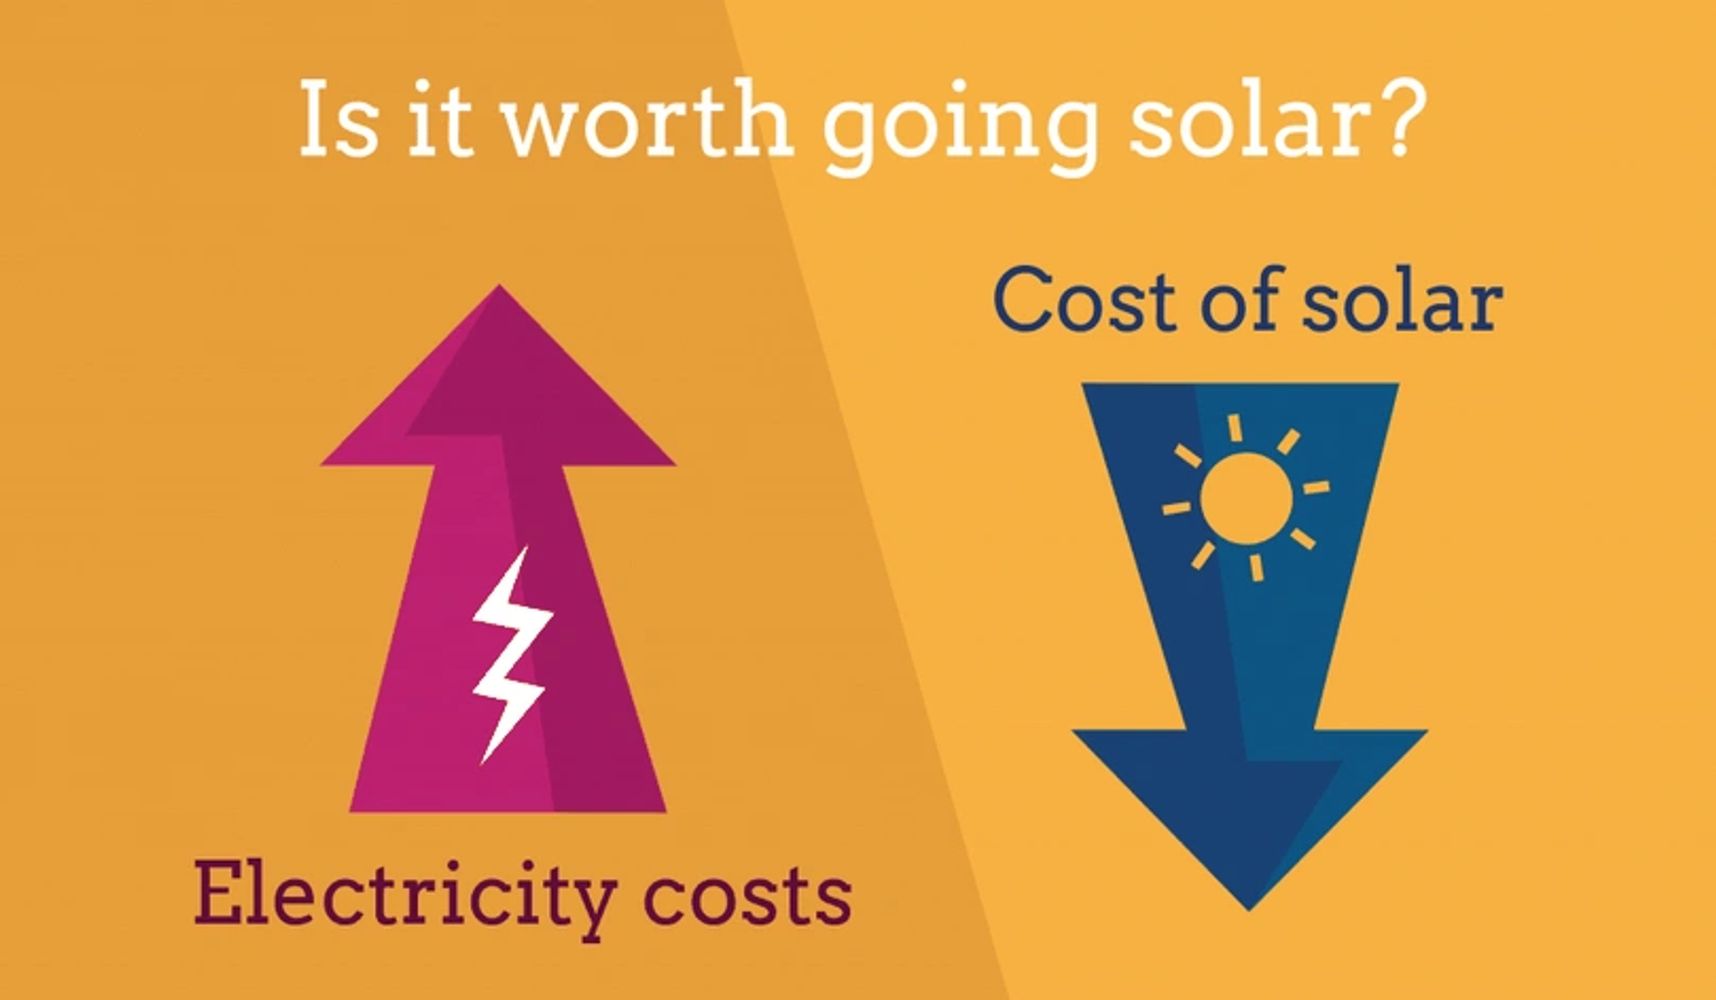 This image shows how electricity costs are increasing and solar energy is getting more affordable. 